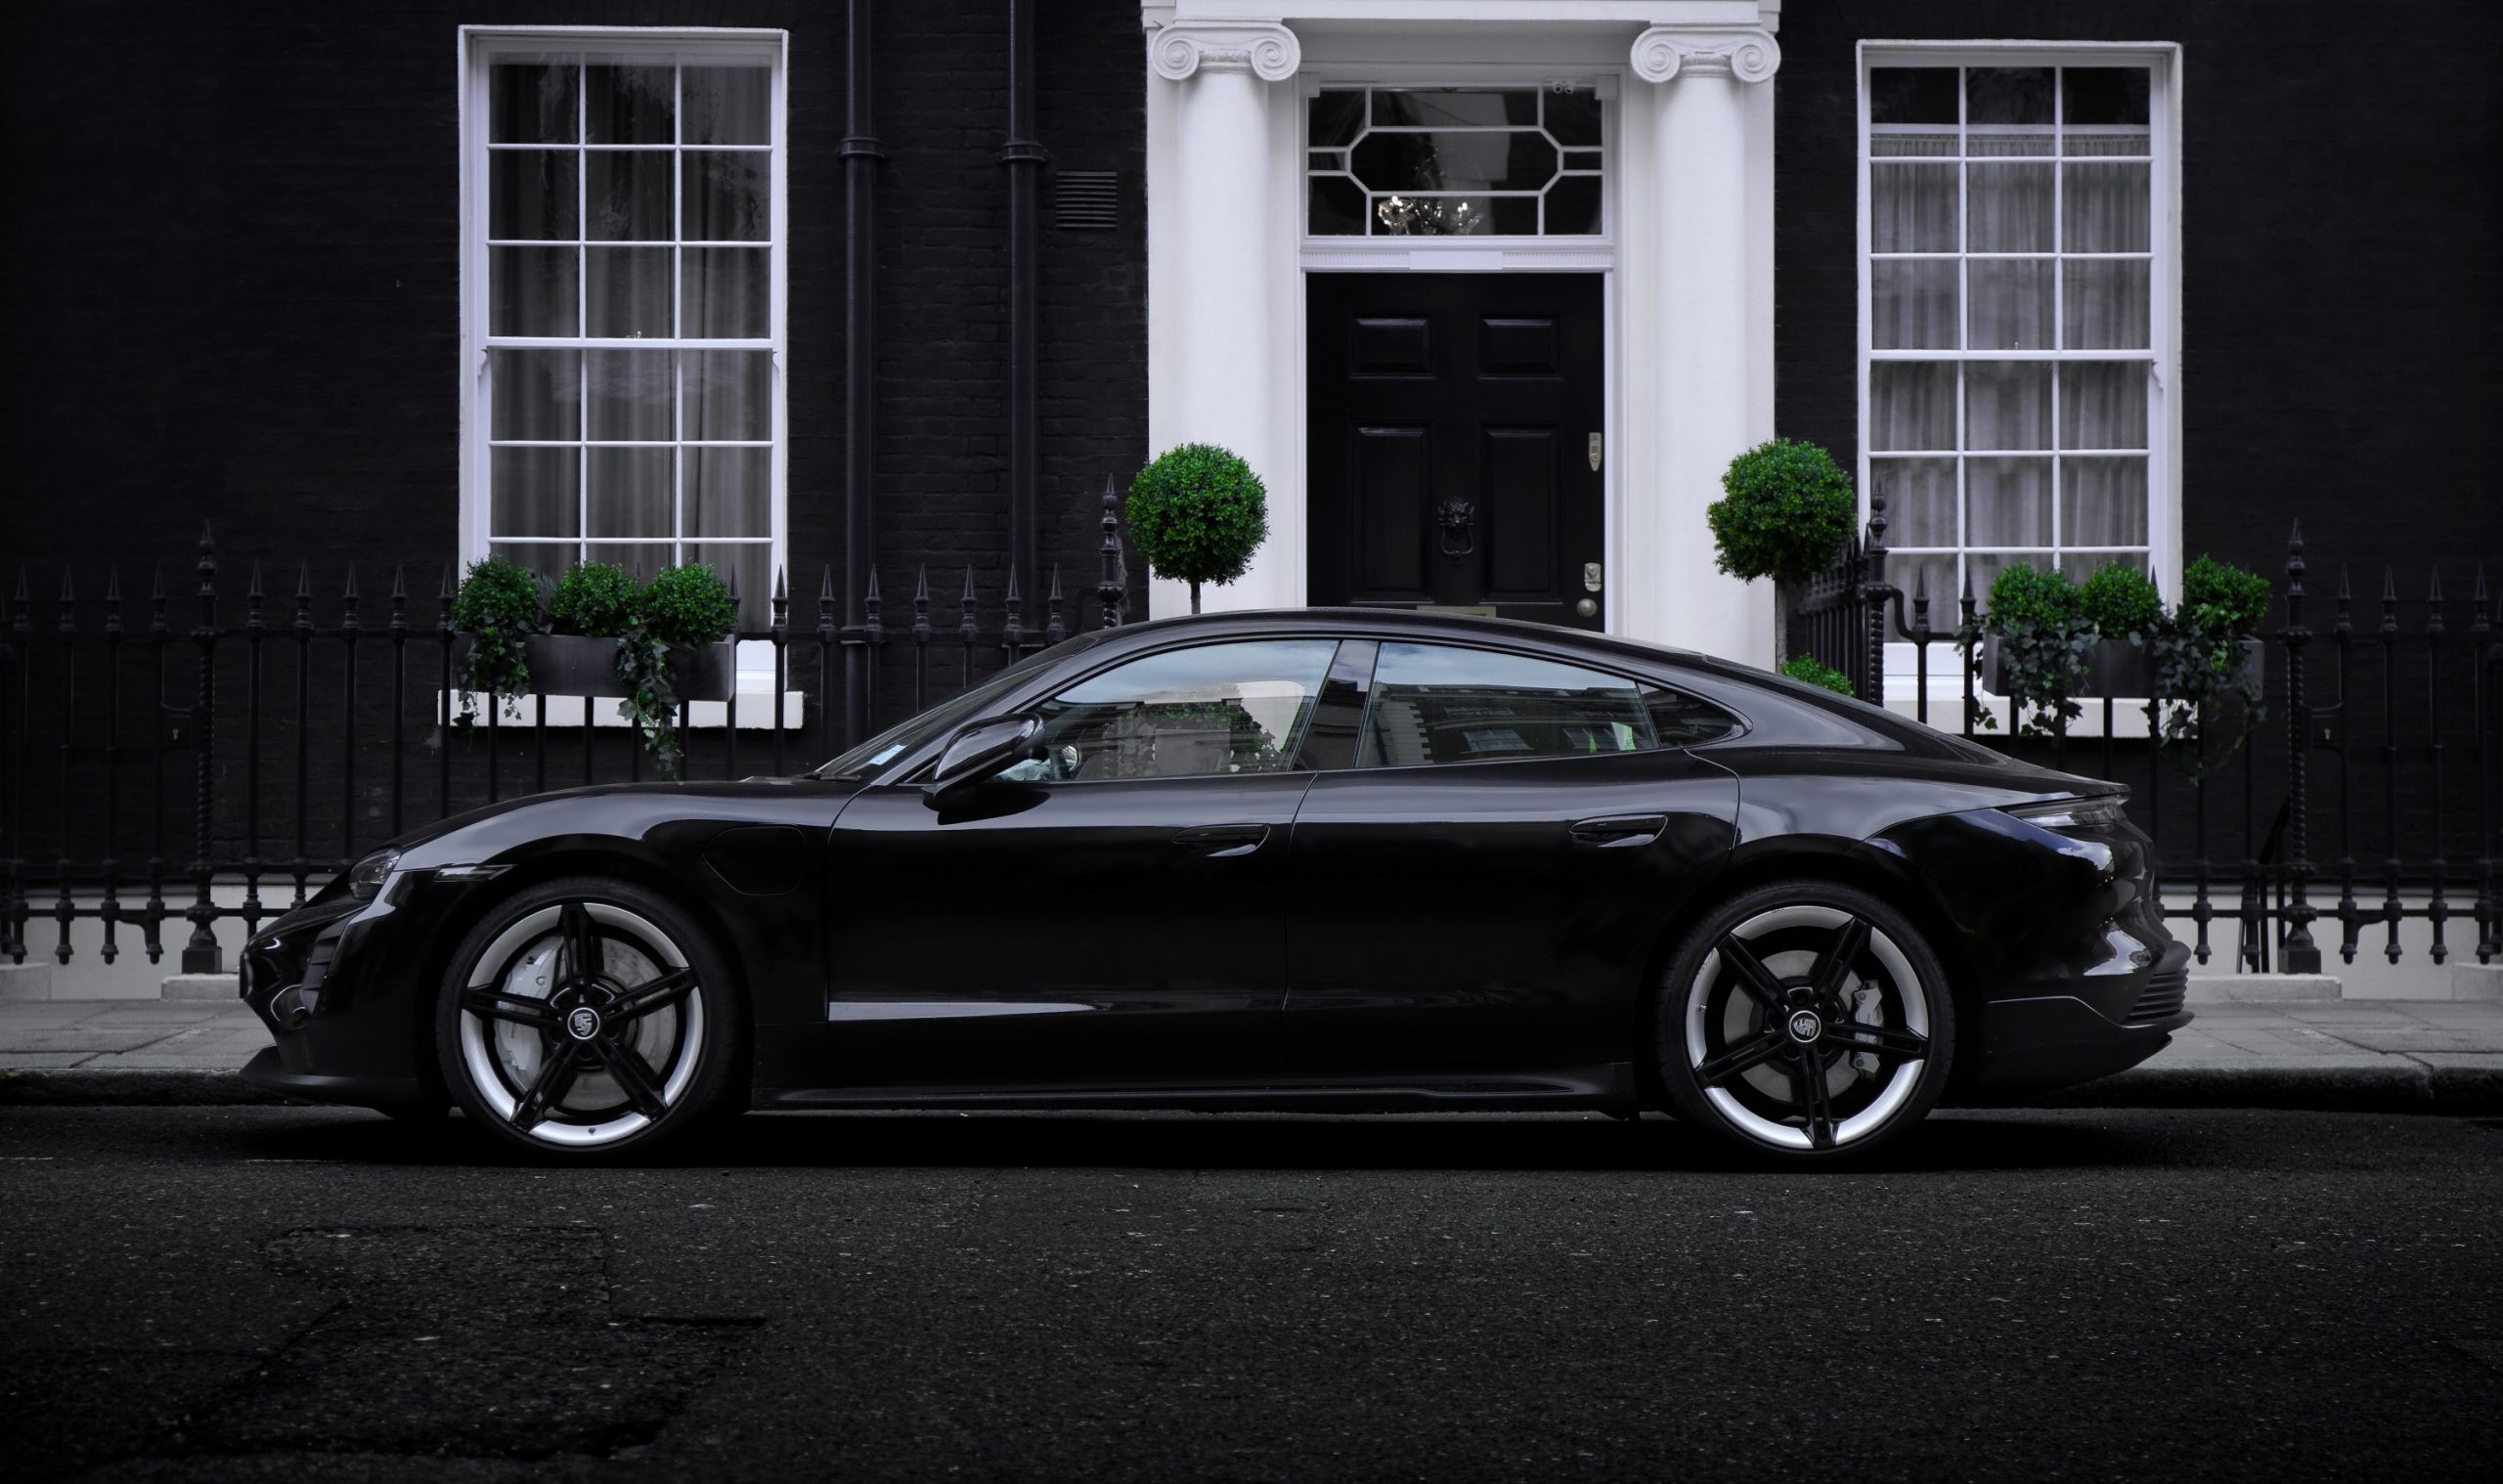 A black Porsche Taycan Turbo S shot in profile while parked on a London curb